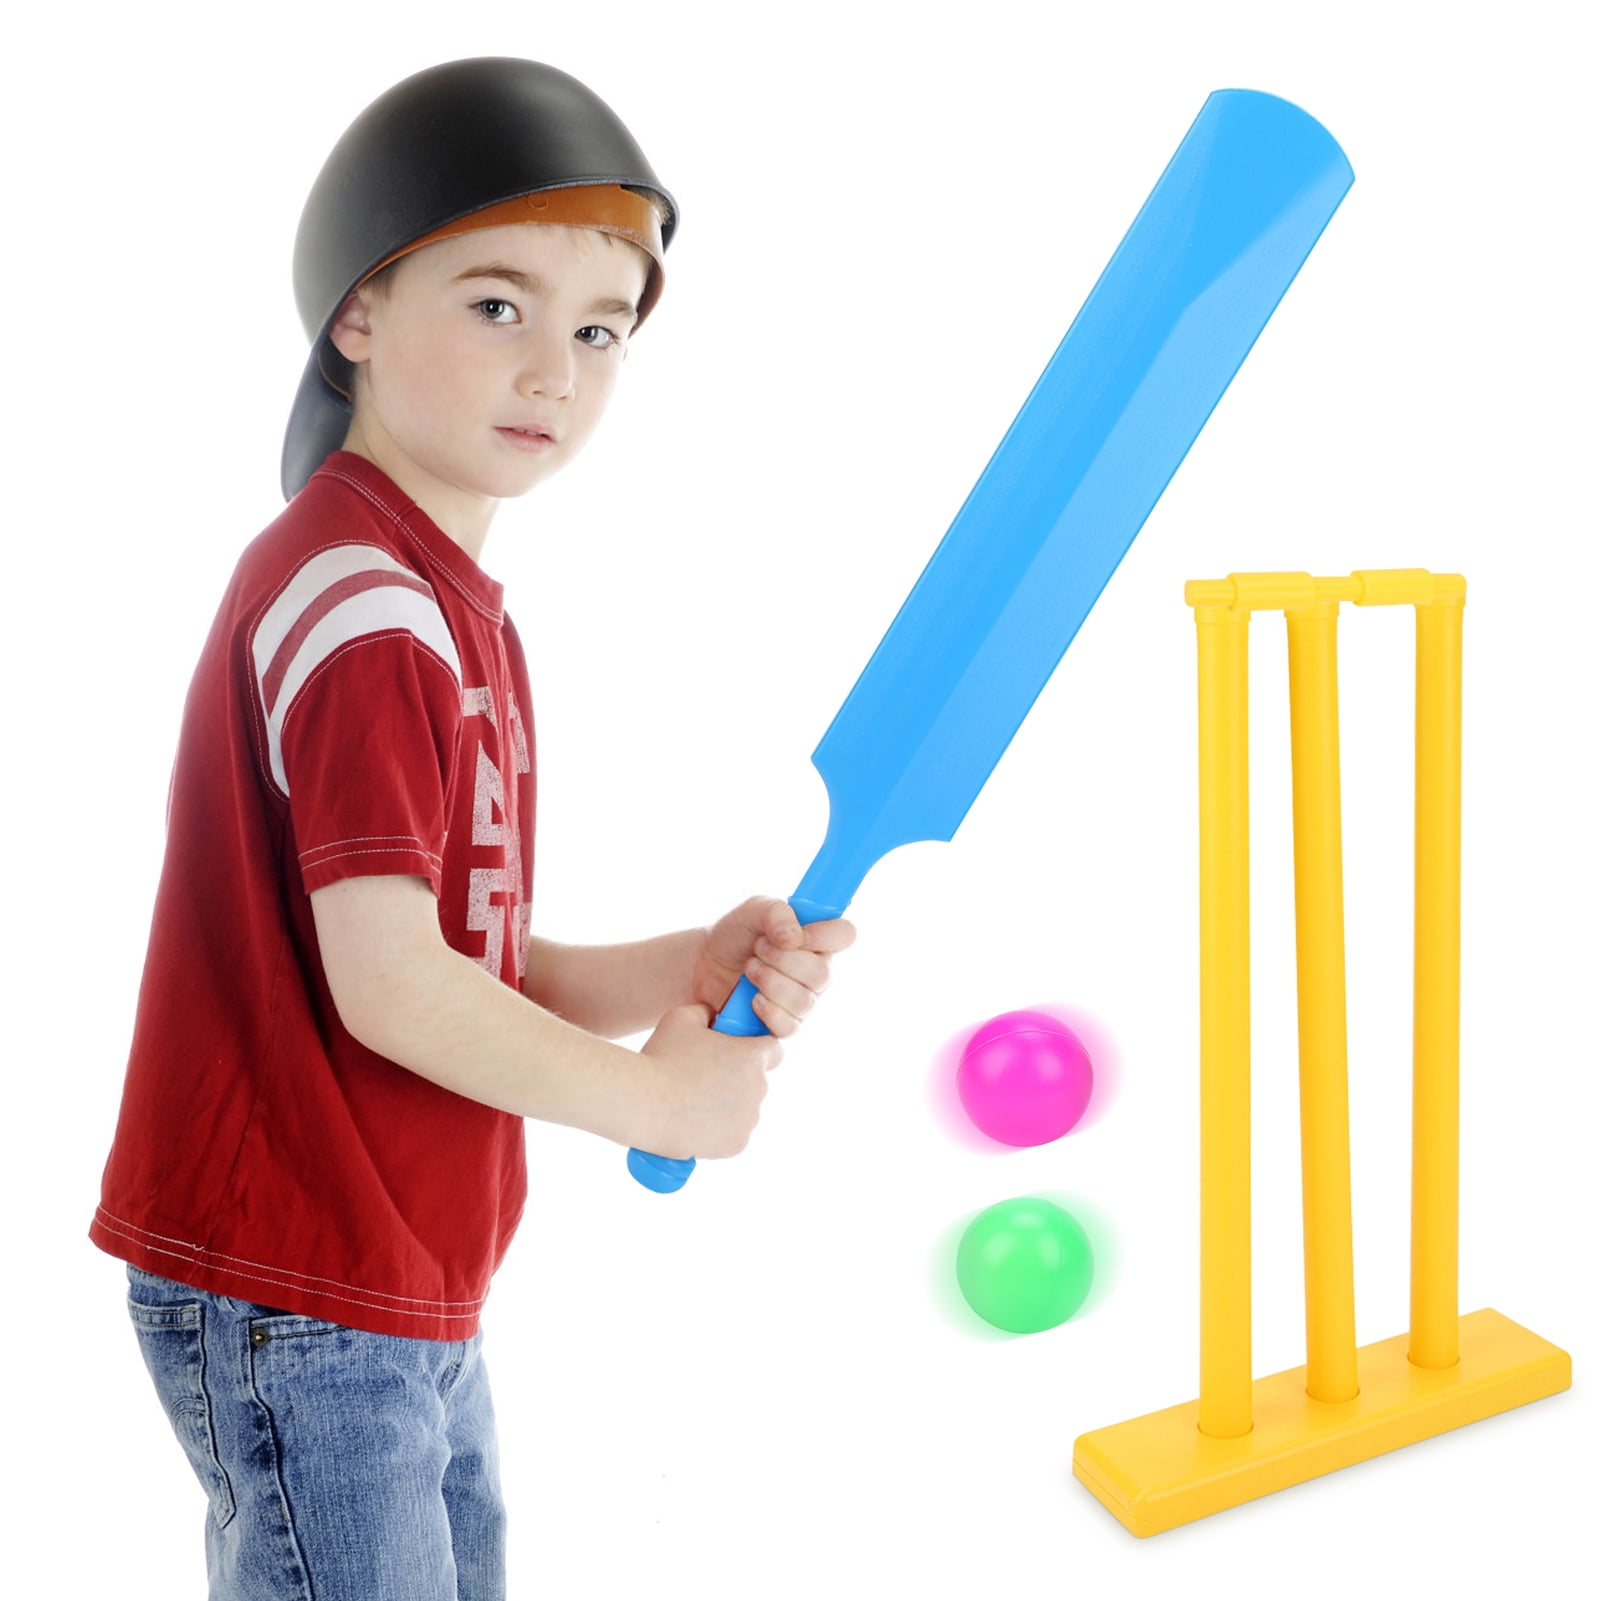 Kids Cricket Set Gift Sports Interactive Board Game Cricket Play Toys Qiilu Cricket Set for Kids 